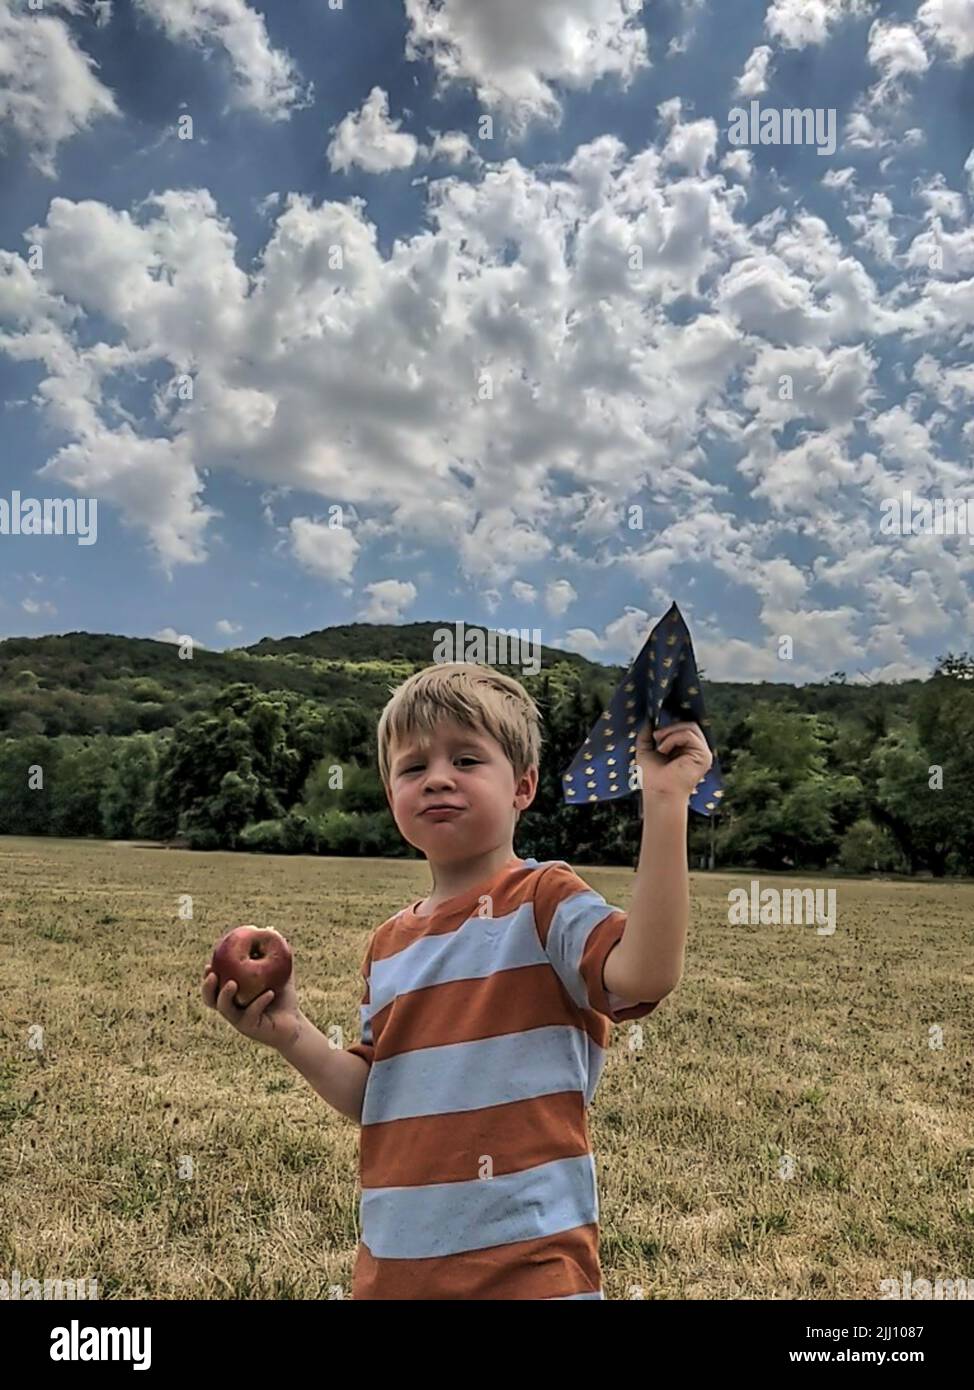 A boy with an apple is holding a paper airplane Stock Photo